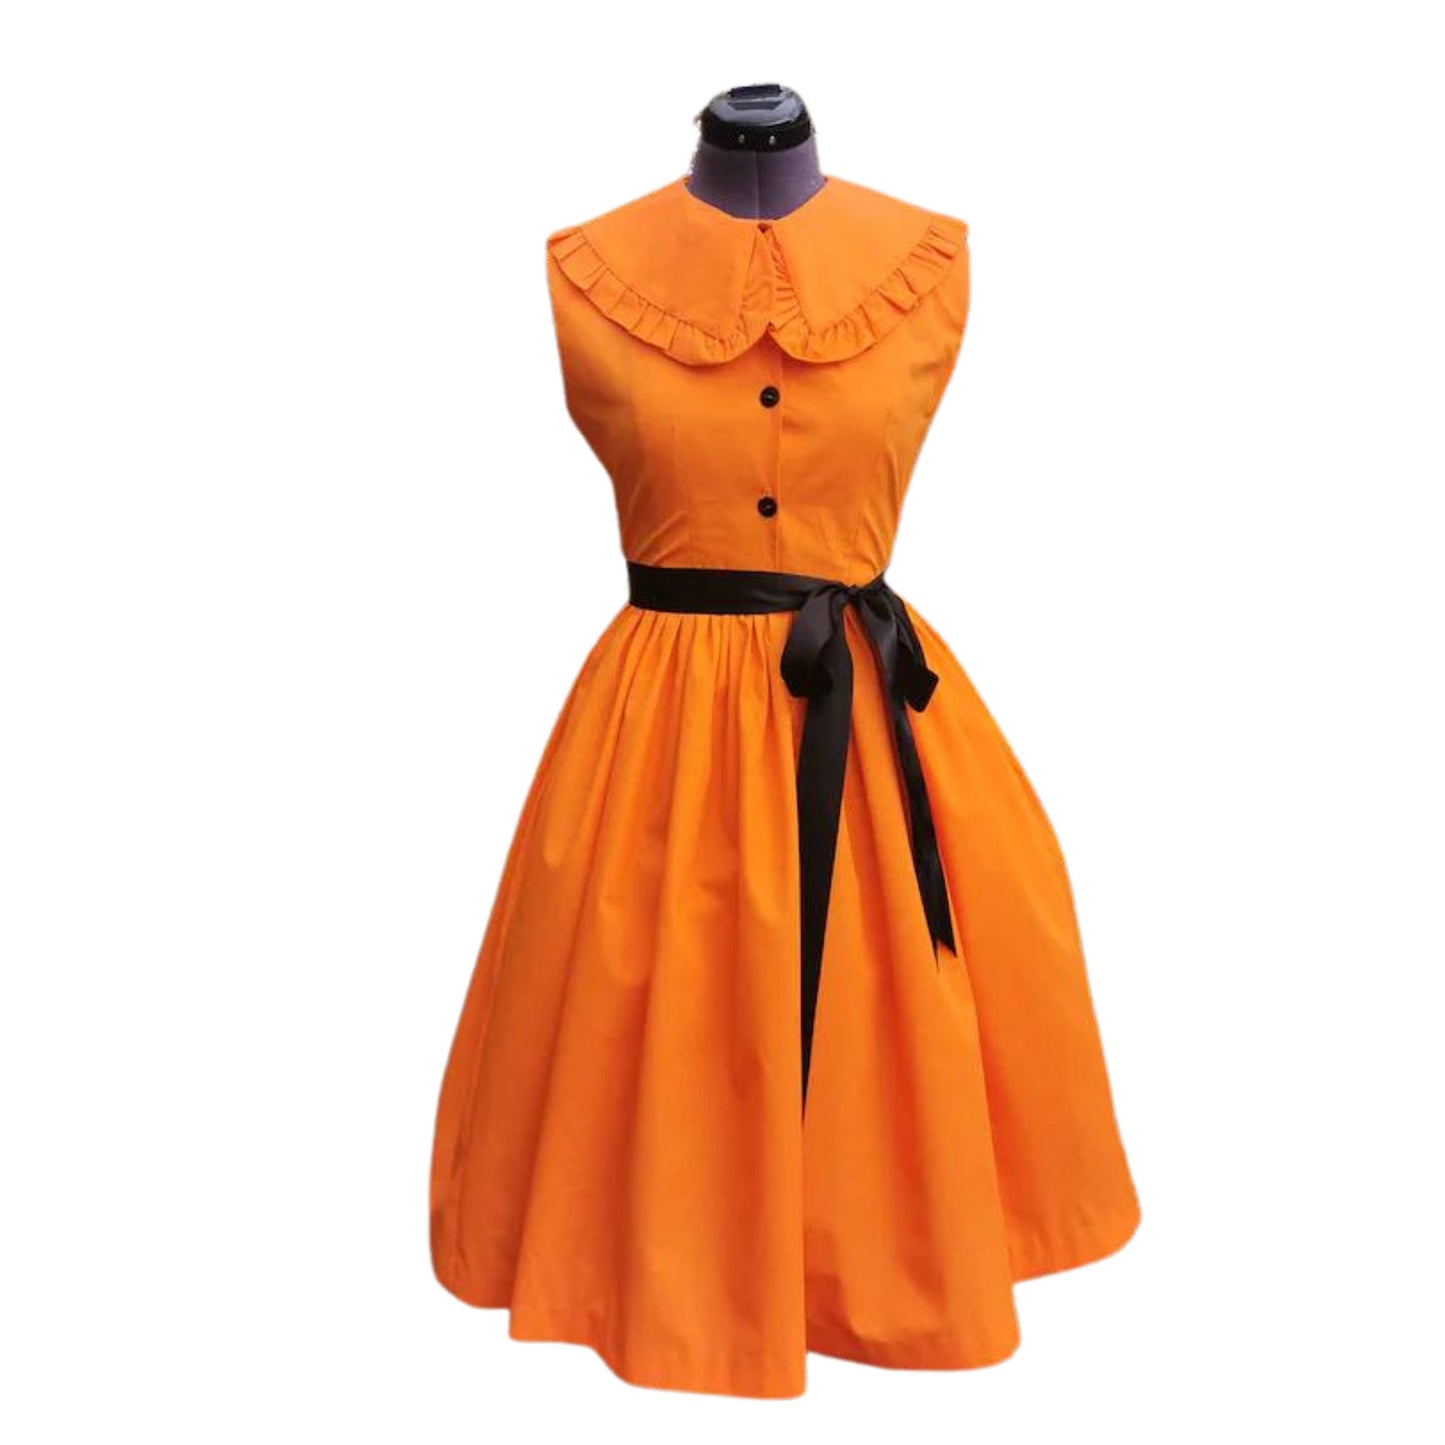 Orange Cotton Tea Dress, 100% cotton poplin dress for a modern girl that loves vintage silhouettes for tea parties, wedding guest or even on the bridal train.

Dress can be made in Yellow or Red cotton or if you have your own fabric you can send it to me.
 Wear as a wedding guest or wear as a bridesmaid or simply wear as a casual dress without the belt.

Wear with a cardigan on col